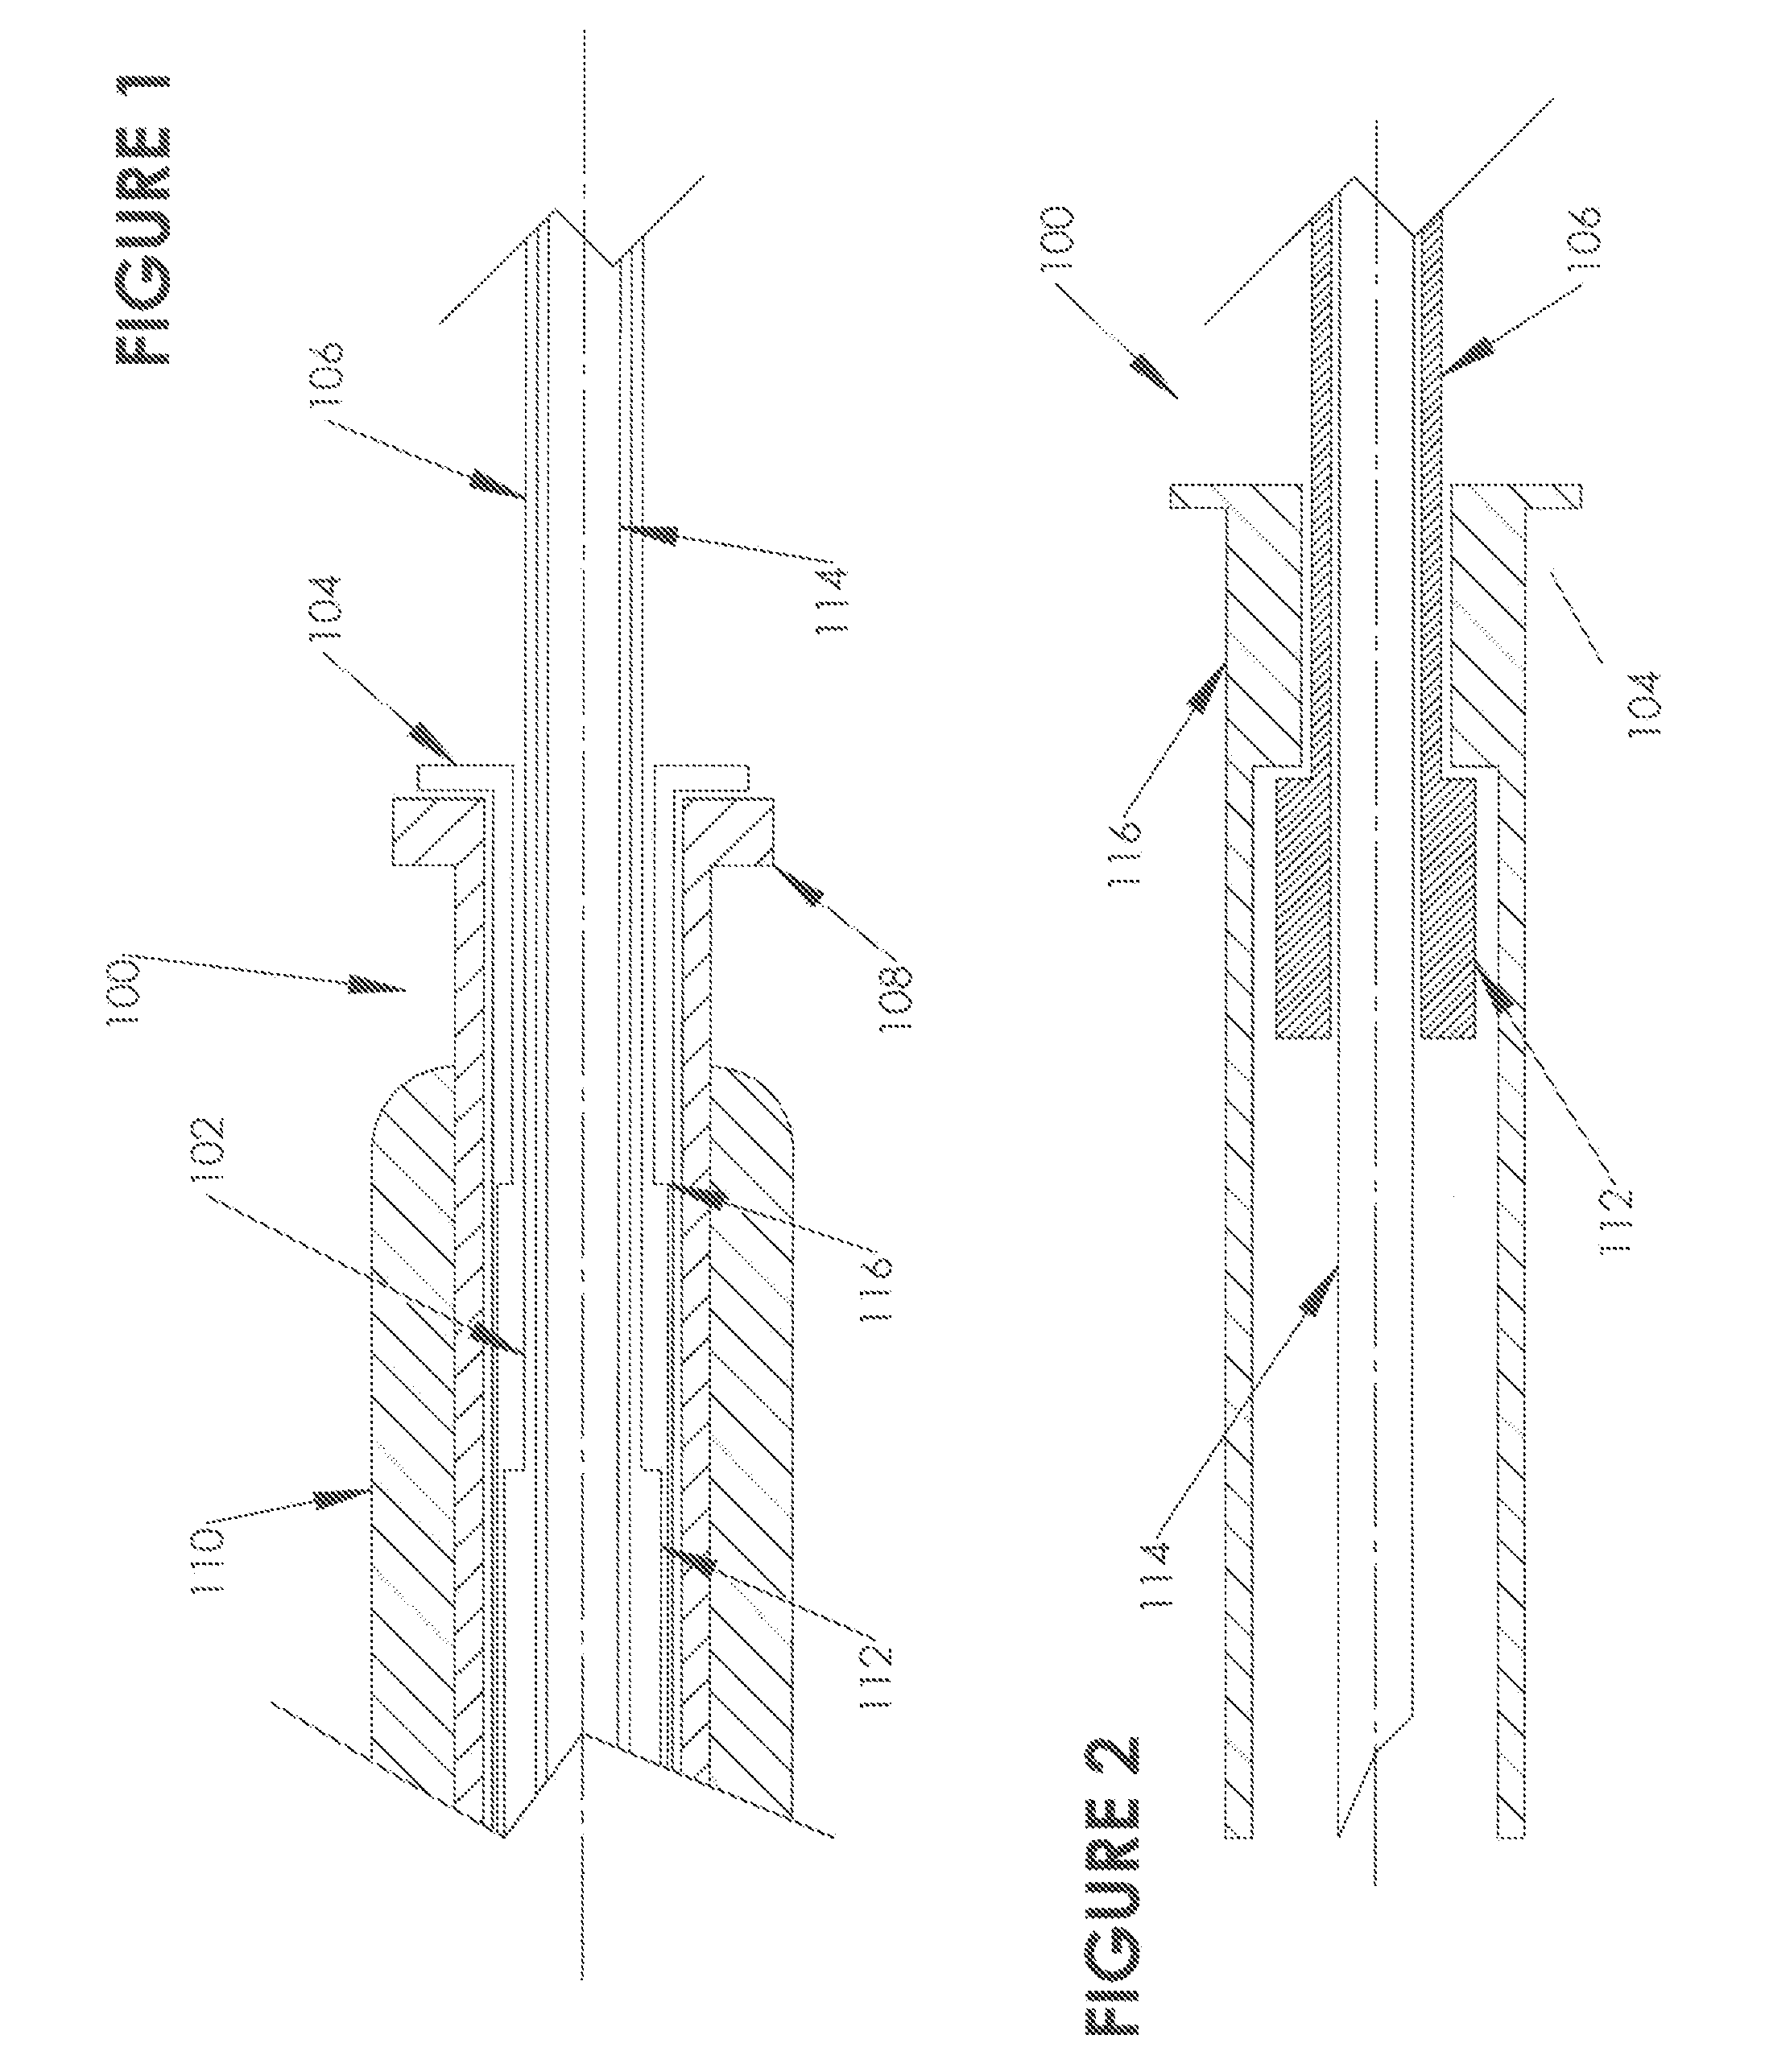 Device for needle biopsy with integrated needle protection